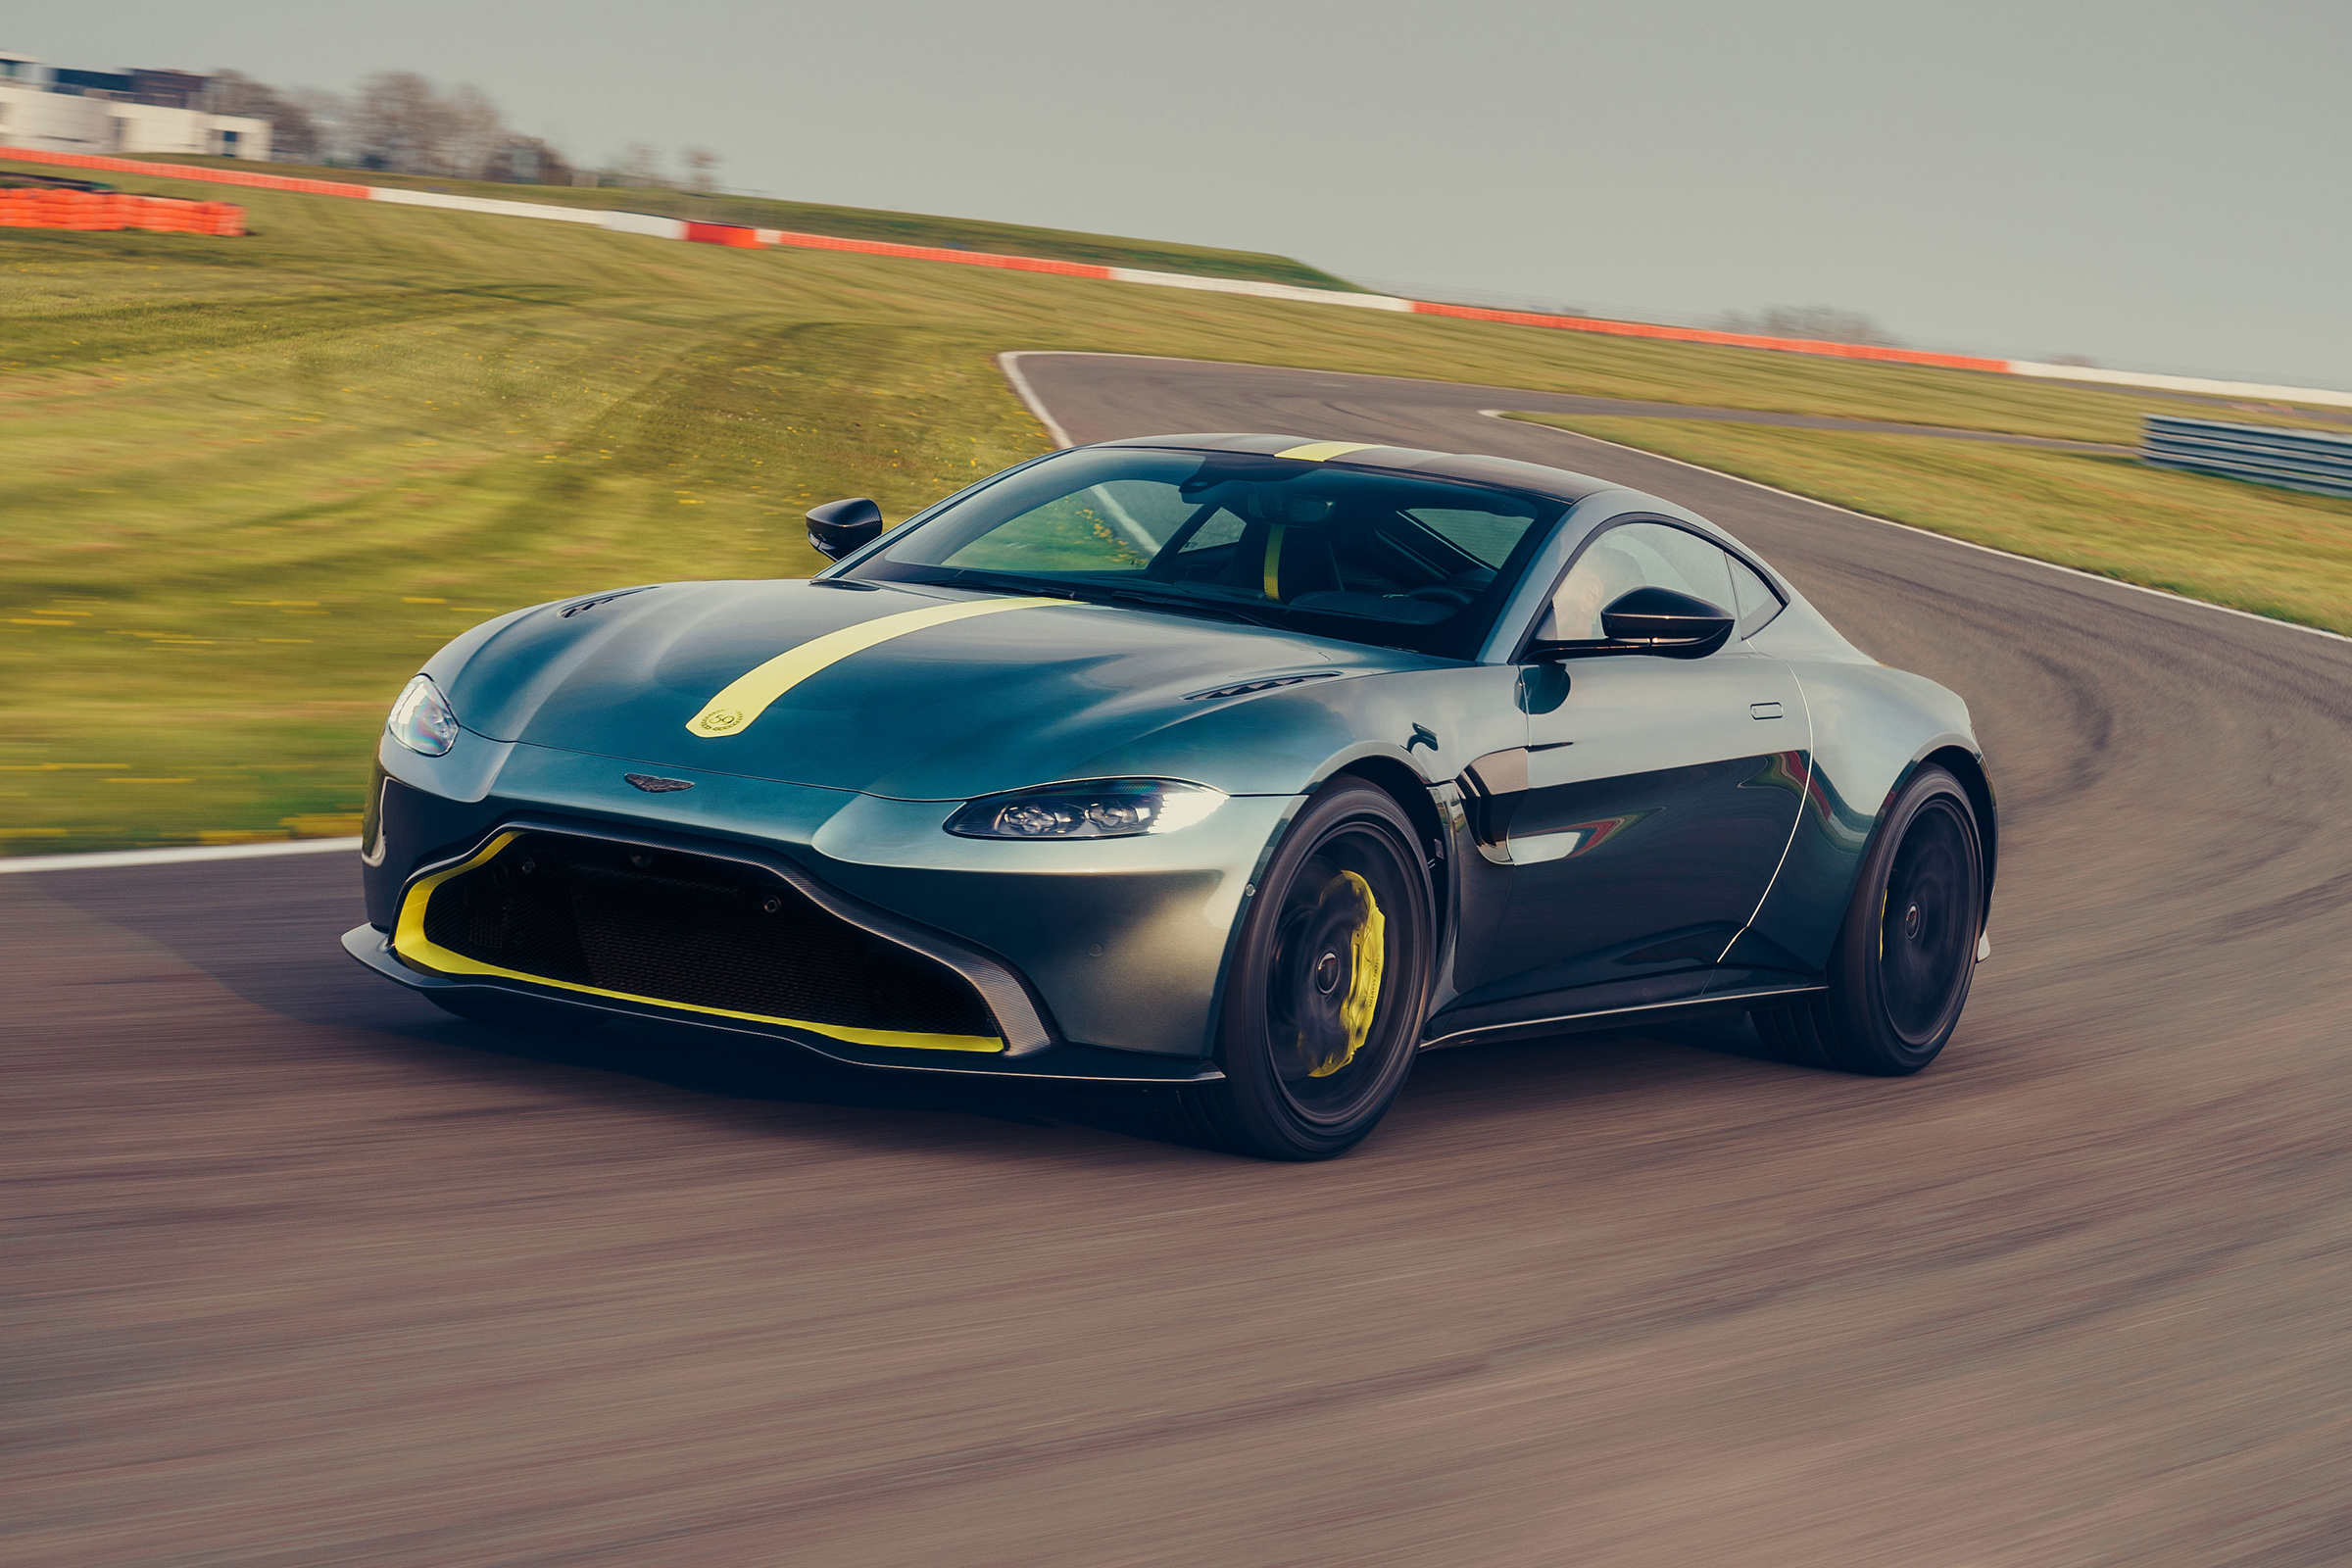 Manual Aston Martin Vantage AMR revealed - pictures | Carbuyer